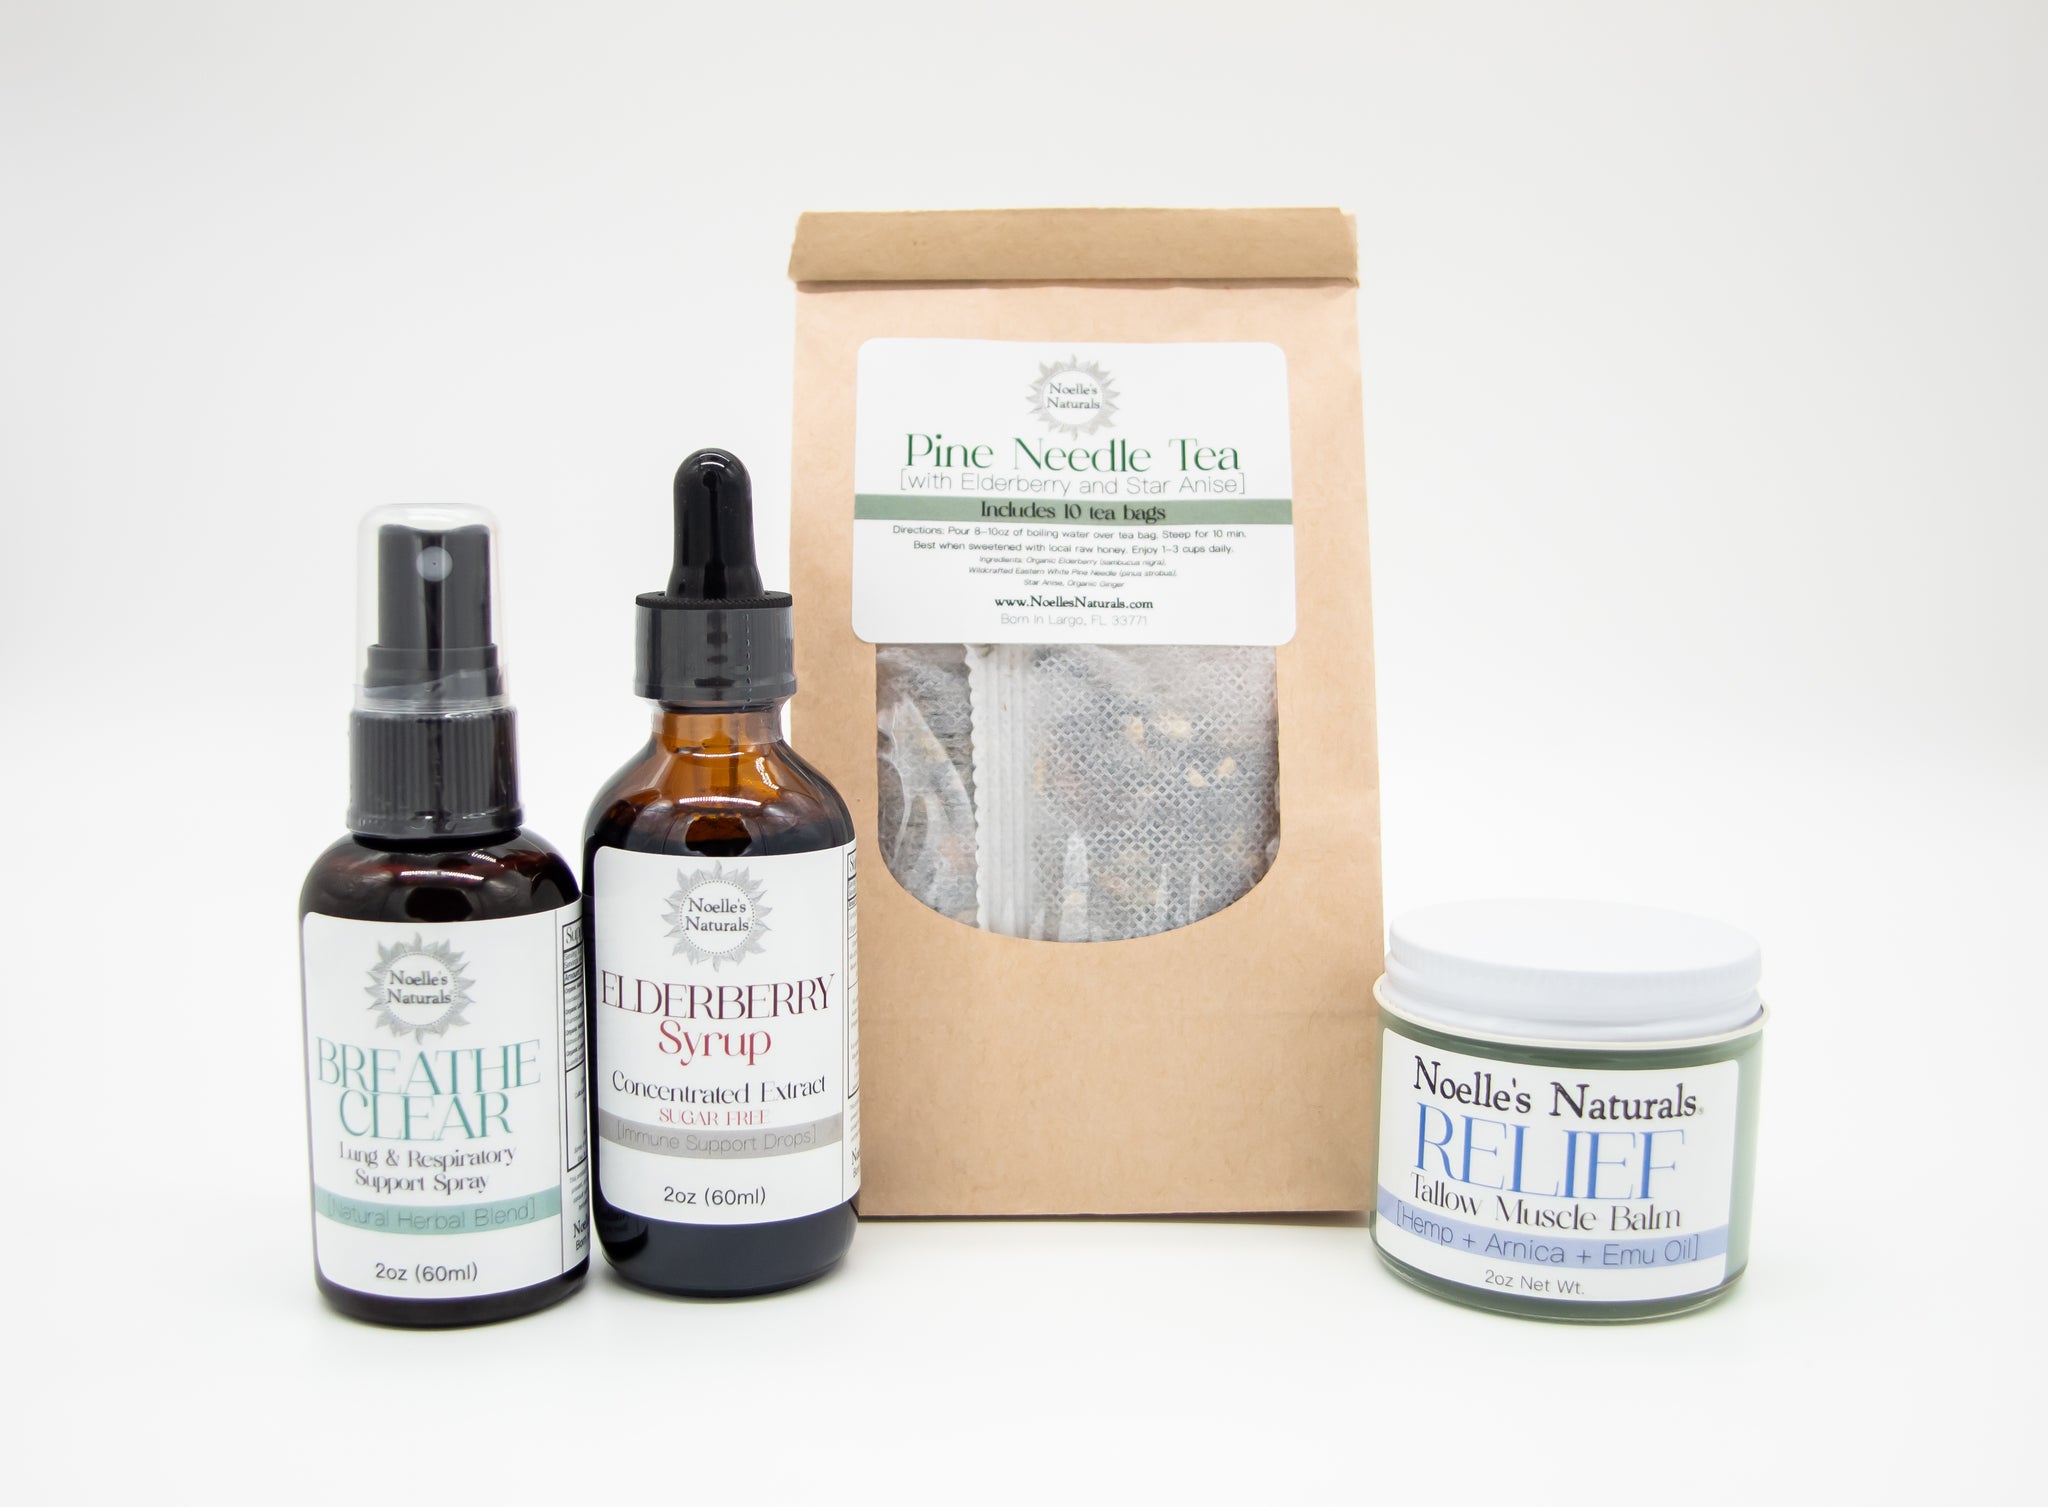 Noelle's Naturals "Feel Better Trio" includes all natural items to best support you when you're ill!